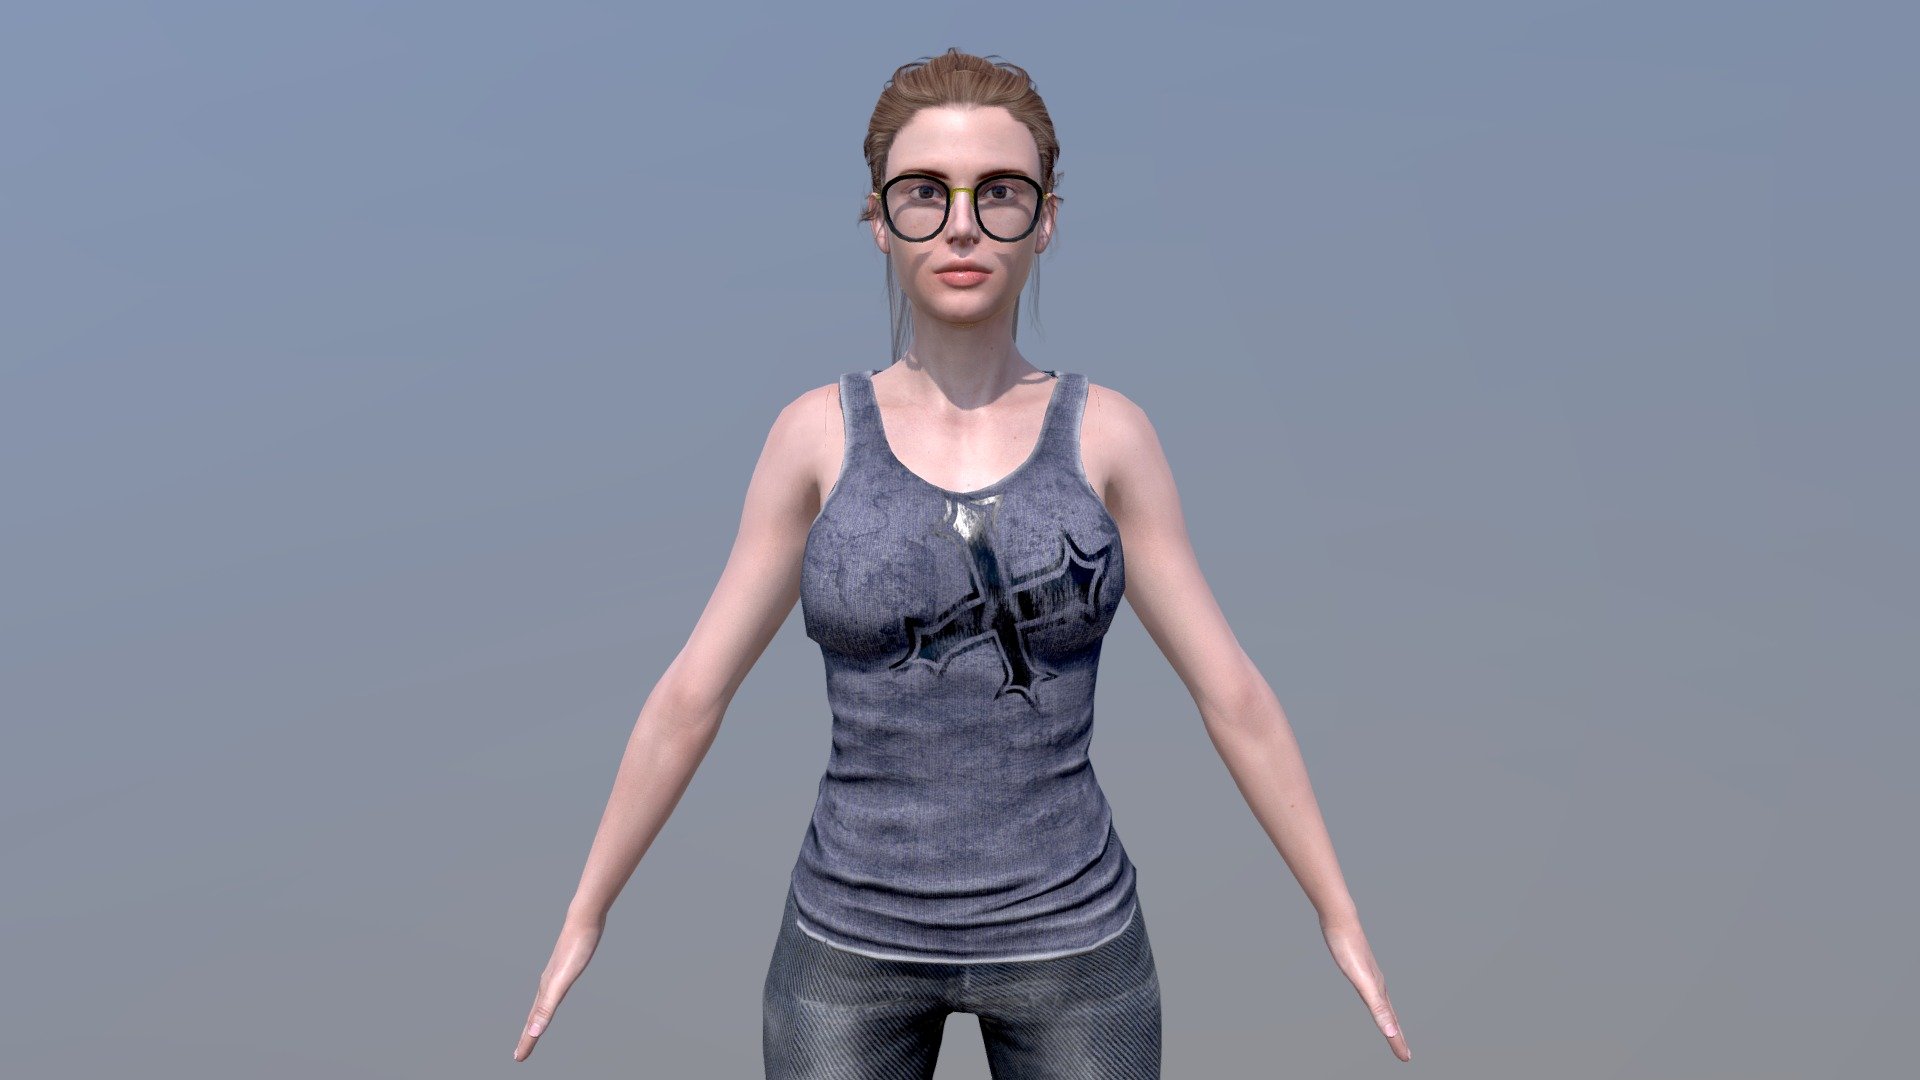 WOMAN-01 CHARACTER

IF YOU NEED MORE BASE MESH OR ANIMATED REALISTIC CHARACTERS PLEASE CHECK MY PROFILE.

* AVAILABLE FILE FORMATS  :-





3DS MAX   (.max)   ver- 2011




UNREAL ENGINE (.uproject)  ver- 4.19




UNITY 3D  (.unitypackage)  ver - 2018




CINEMA 4D  (.c4d)     ver- R19      




BLENDER  (.blend)     ver- 2.9




SKETCHUP  (.skp)  ver- 2017




COLLADA  (.dae) 




.obj , .mtl




.fbx




.3ds 




.stl




.dxf



* MORPH CONTROLS:-





68 FACE  CONTROLS




07 TONGUE  CONTROLS



- NOTES





MAIN PRODUCT IS HIGH POLY MODEL




ALSO INCLUDED LOW POLY GAME BASE MODEL ONLY IN FBX FORMAT 




RIGGED , ANIMATED , UV MAPED , PBR TEXTURES



- POLYGONS




HIGH POLY MODEL*

38923(POLY) ,, 32732(VERT) ,, 57538(TRI)




LOW POLY MODEL*

12799 (POLY) ,, 11922 (VERT) ,, 20950 (TRI) 



![] - WOMAN-1 - Buy Royalty Free 3D model by jasirkt 3d model